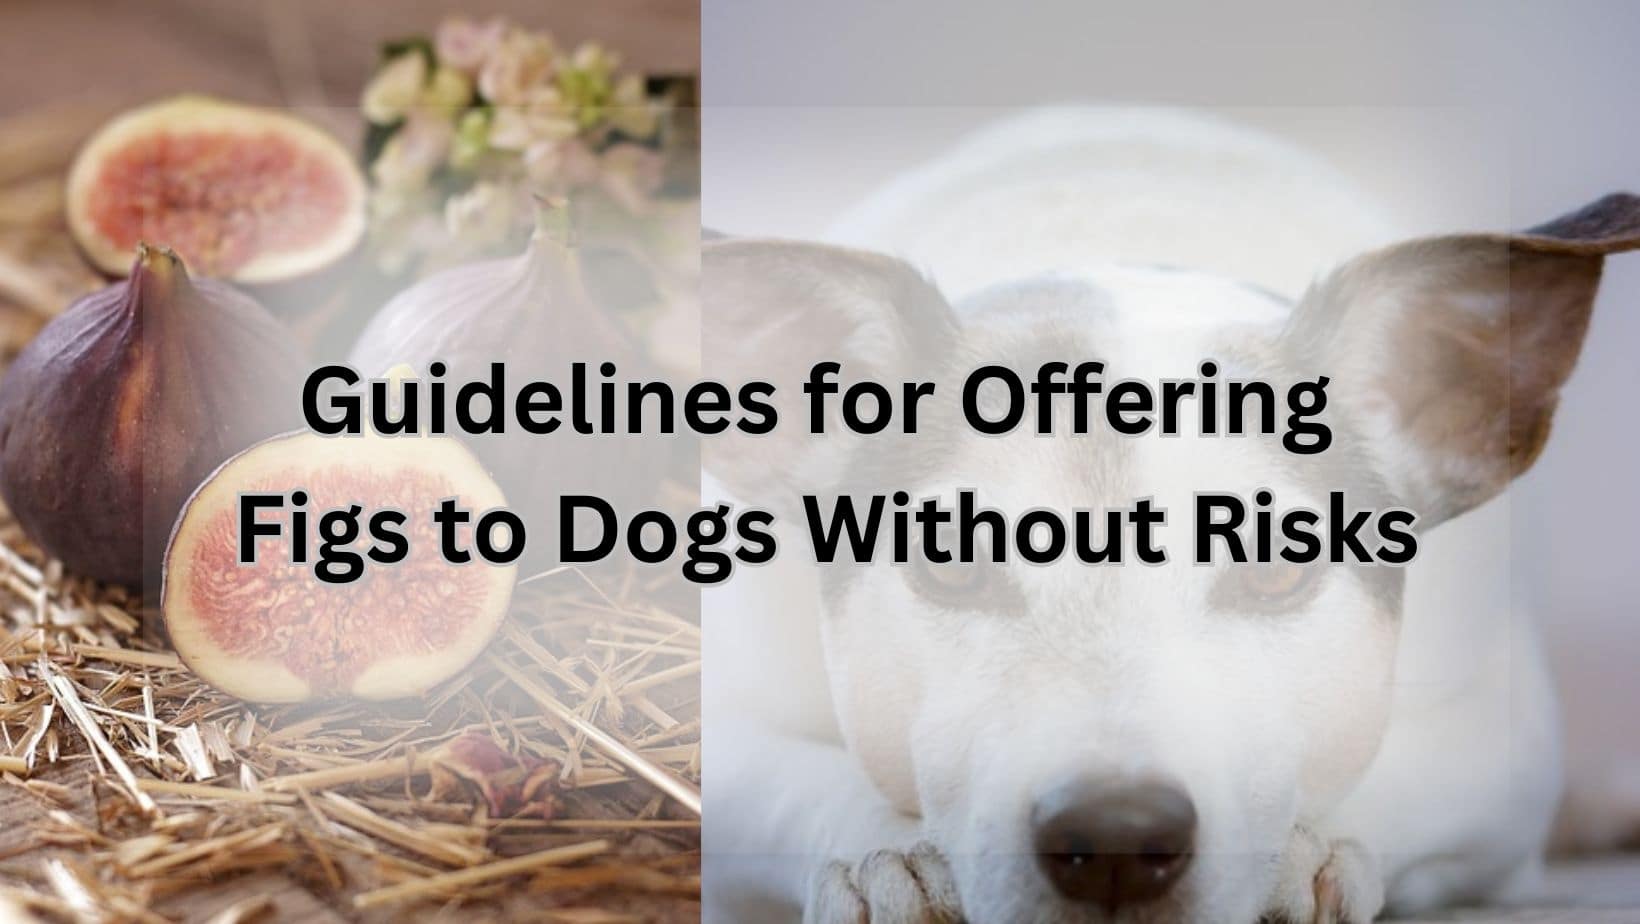 Guidelines for Offering Figs to Dogs Without Risks